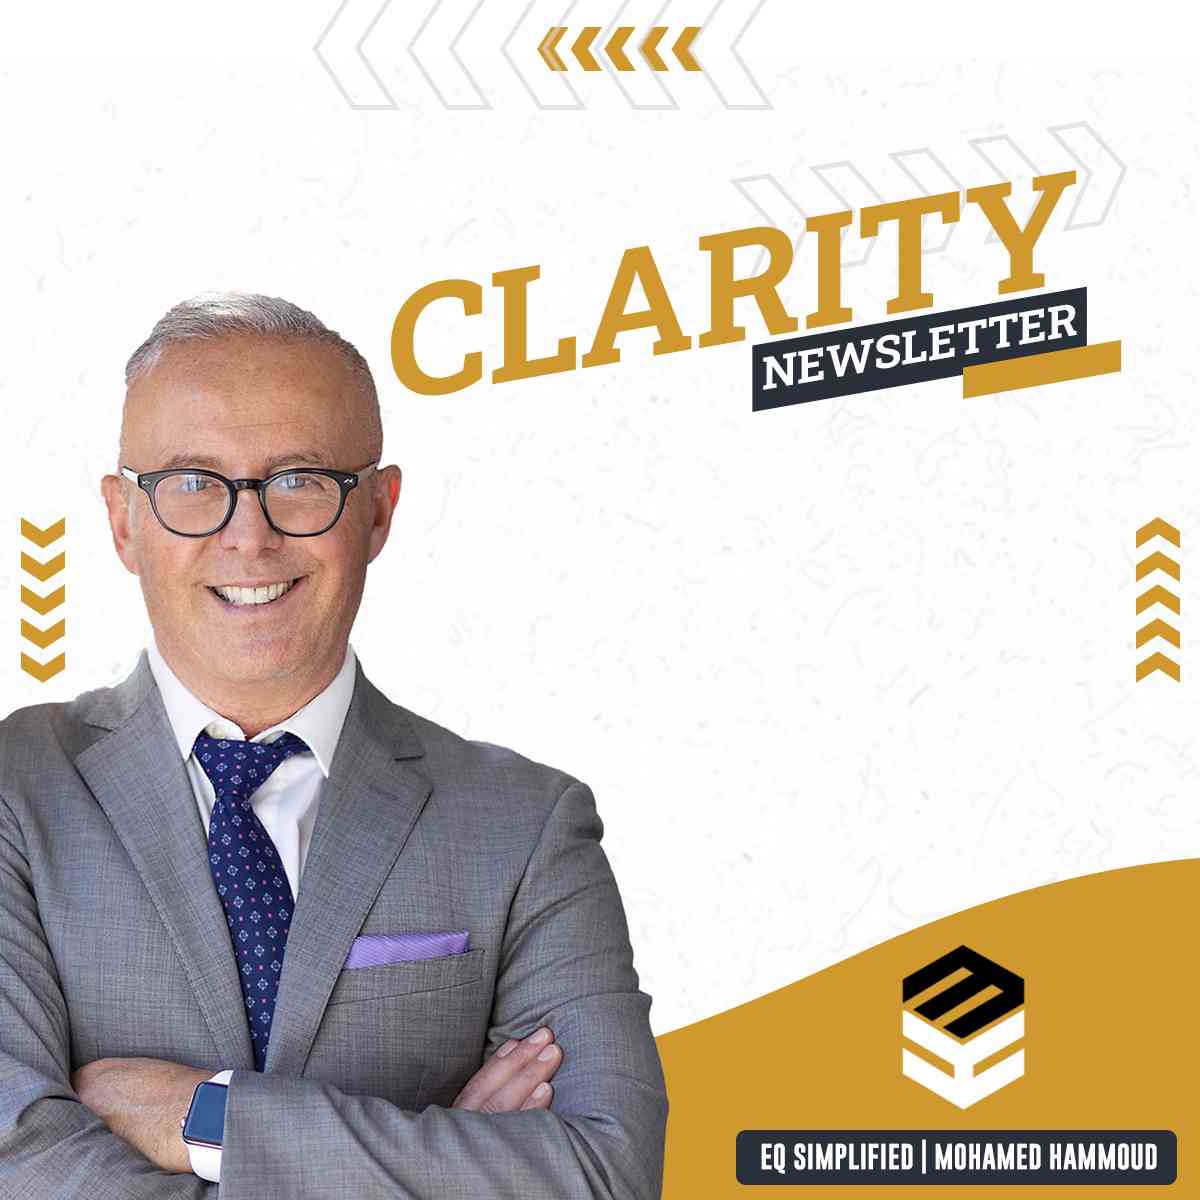 Clarity:  A Leader’s Greatest Gift in Times of Uncertainty